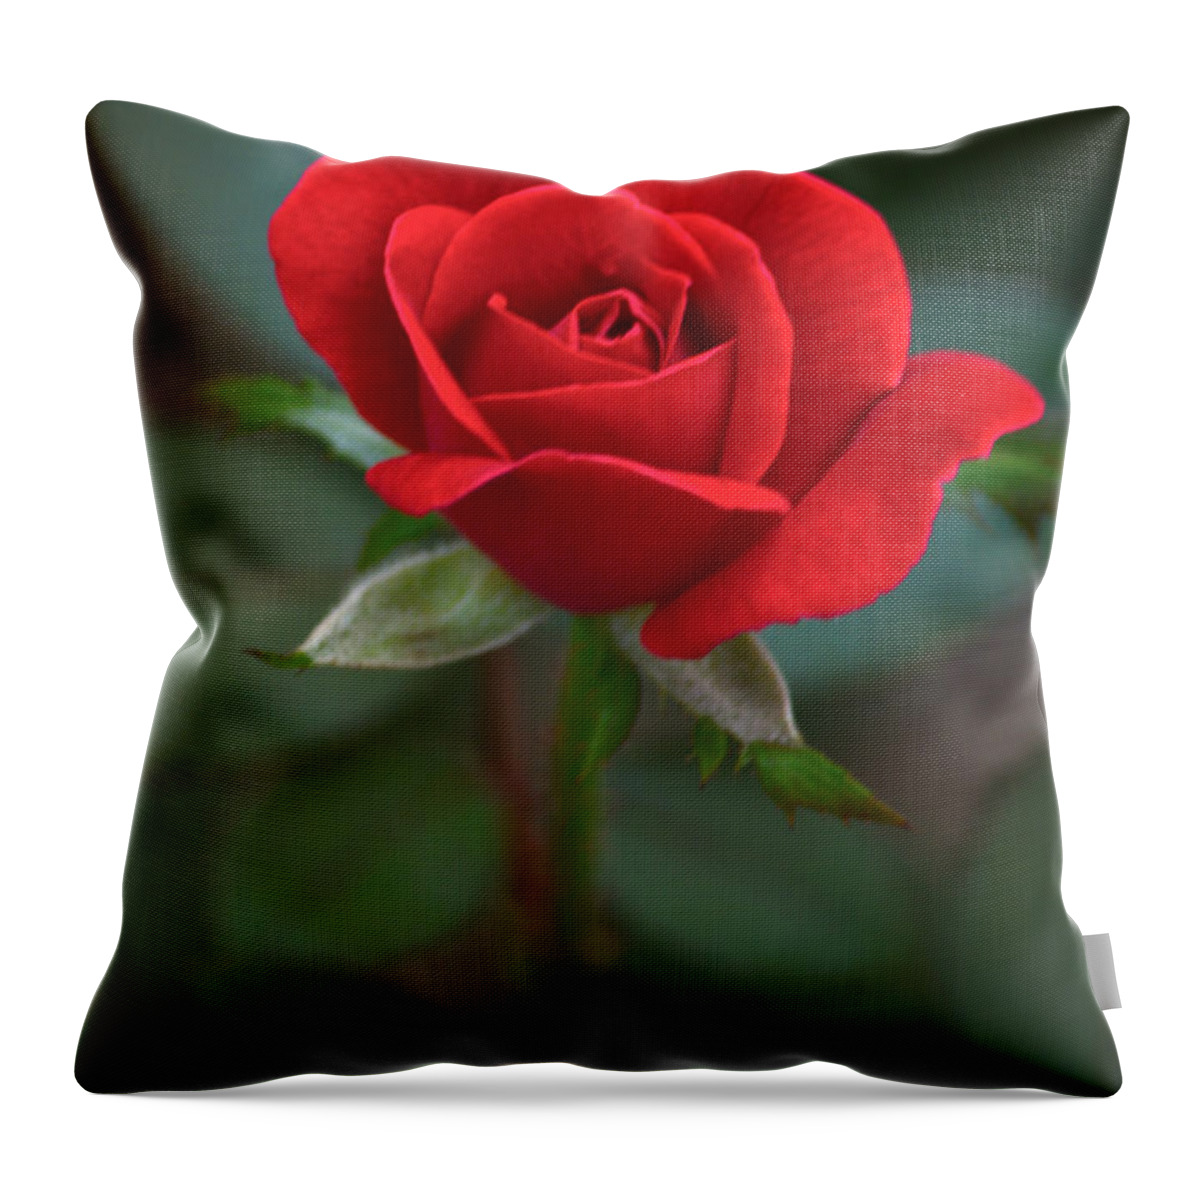 Flower Throw Pillow featuring the photograph The Perfect Rose by Parker Cunningham